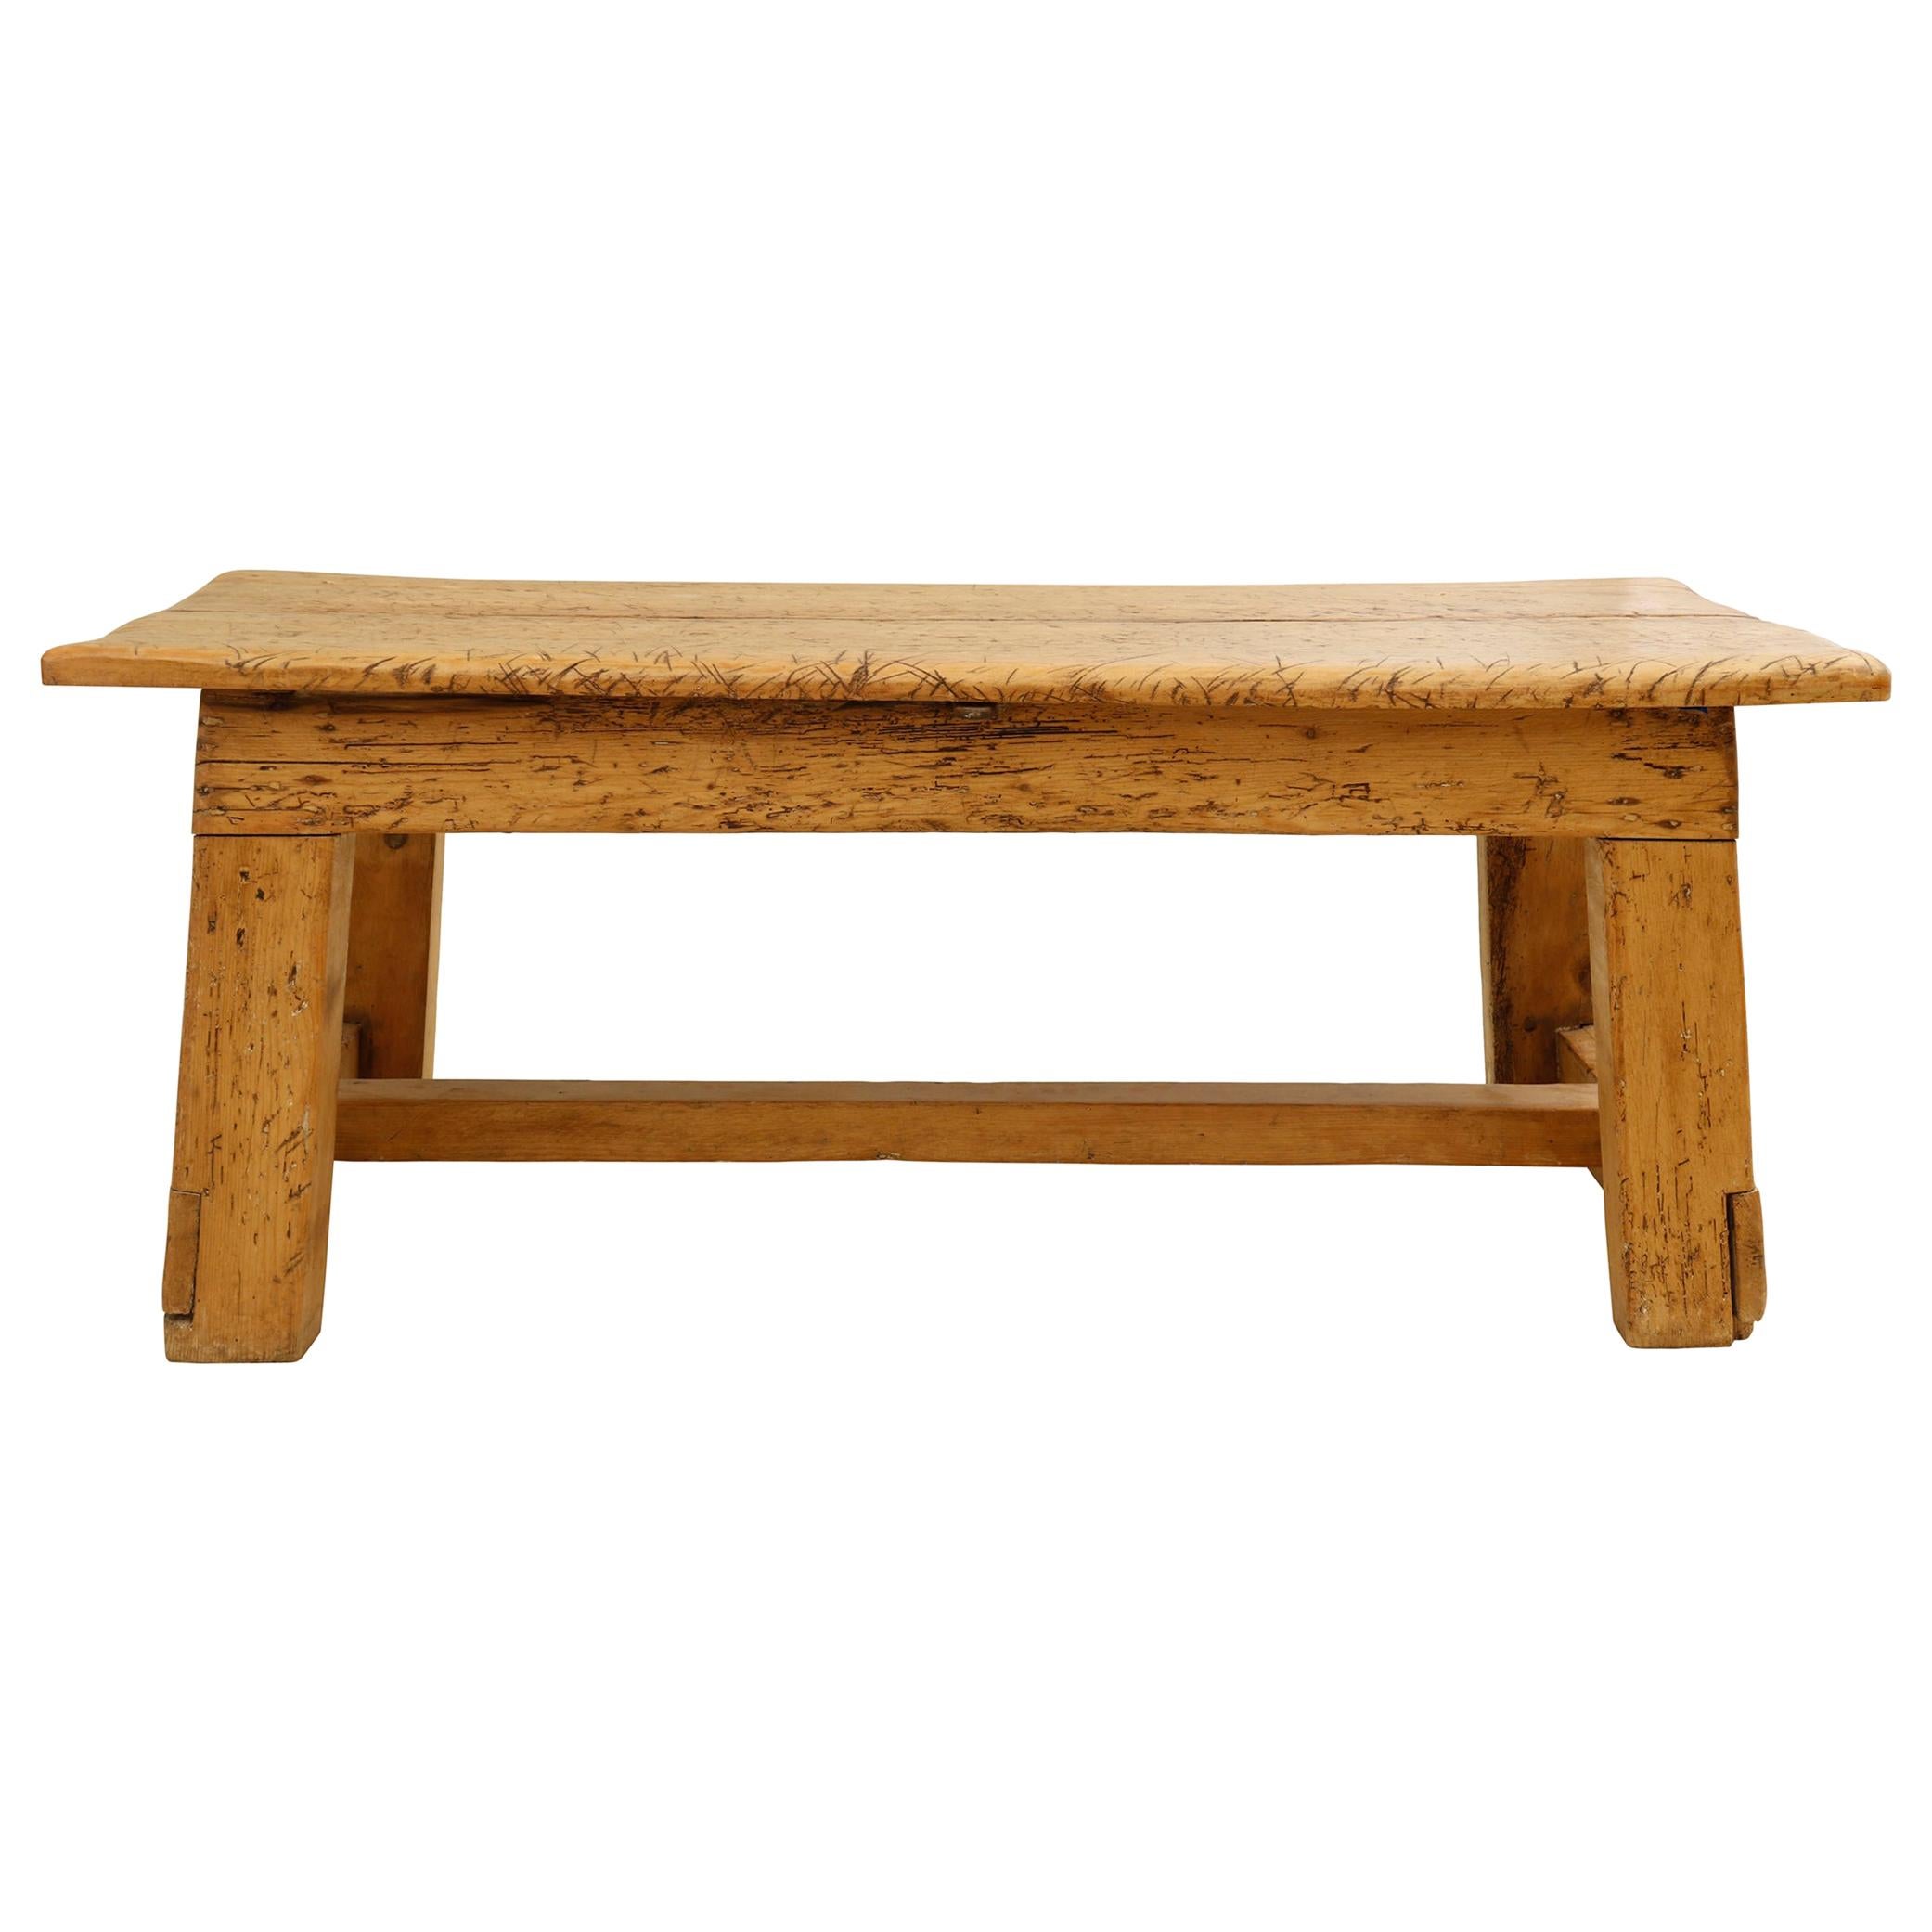 Bold Rustic Bench or Low Table